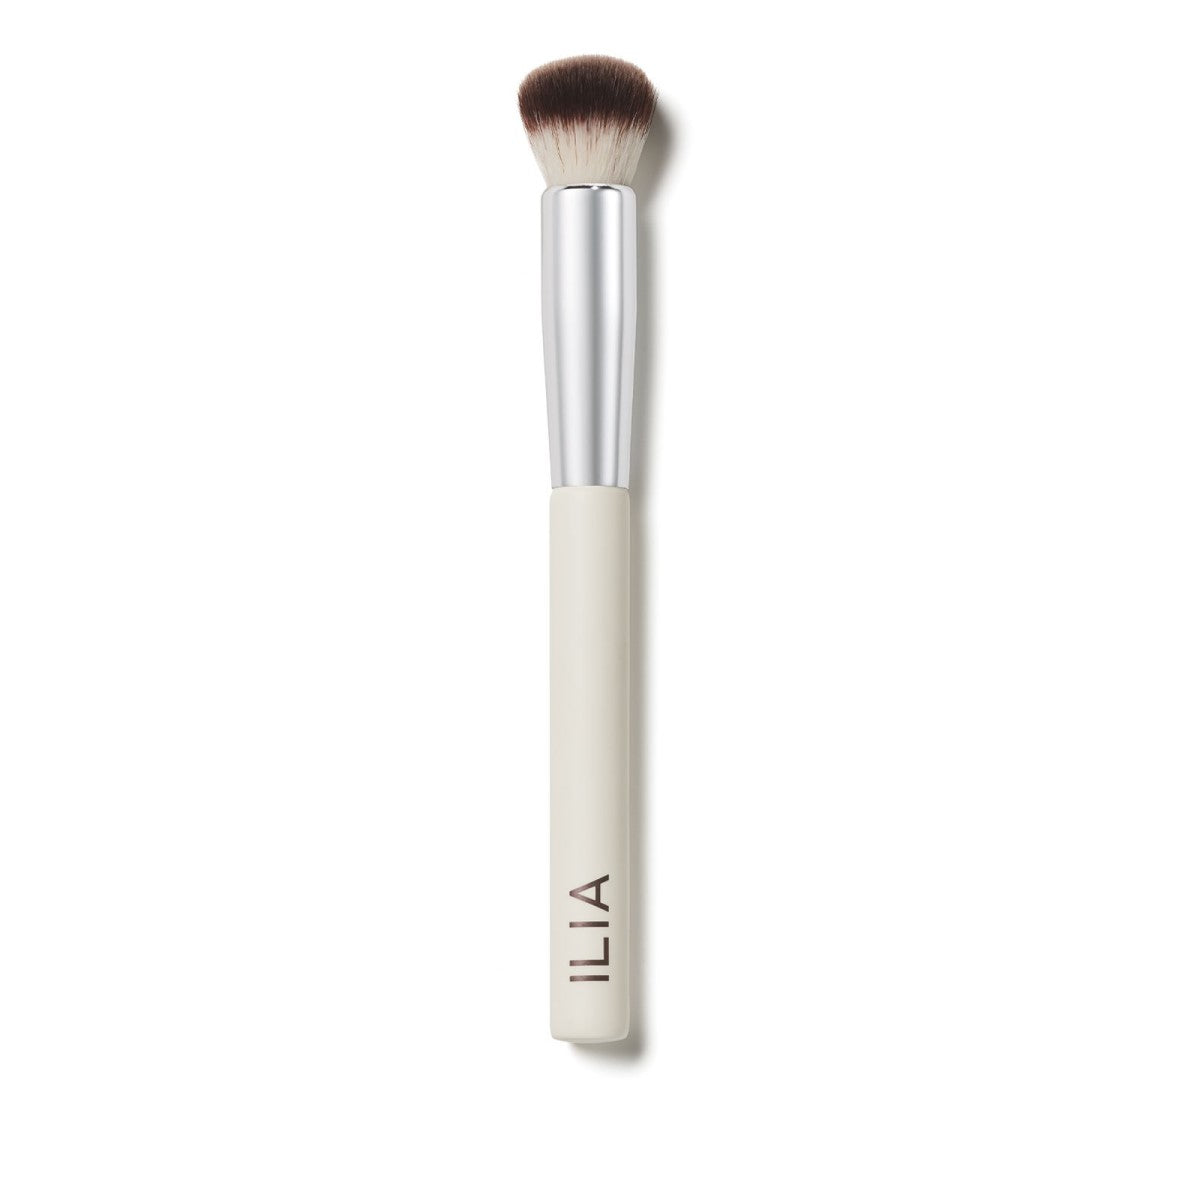 Primary Image of Complexion Brush